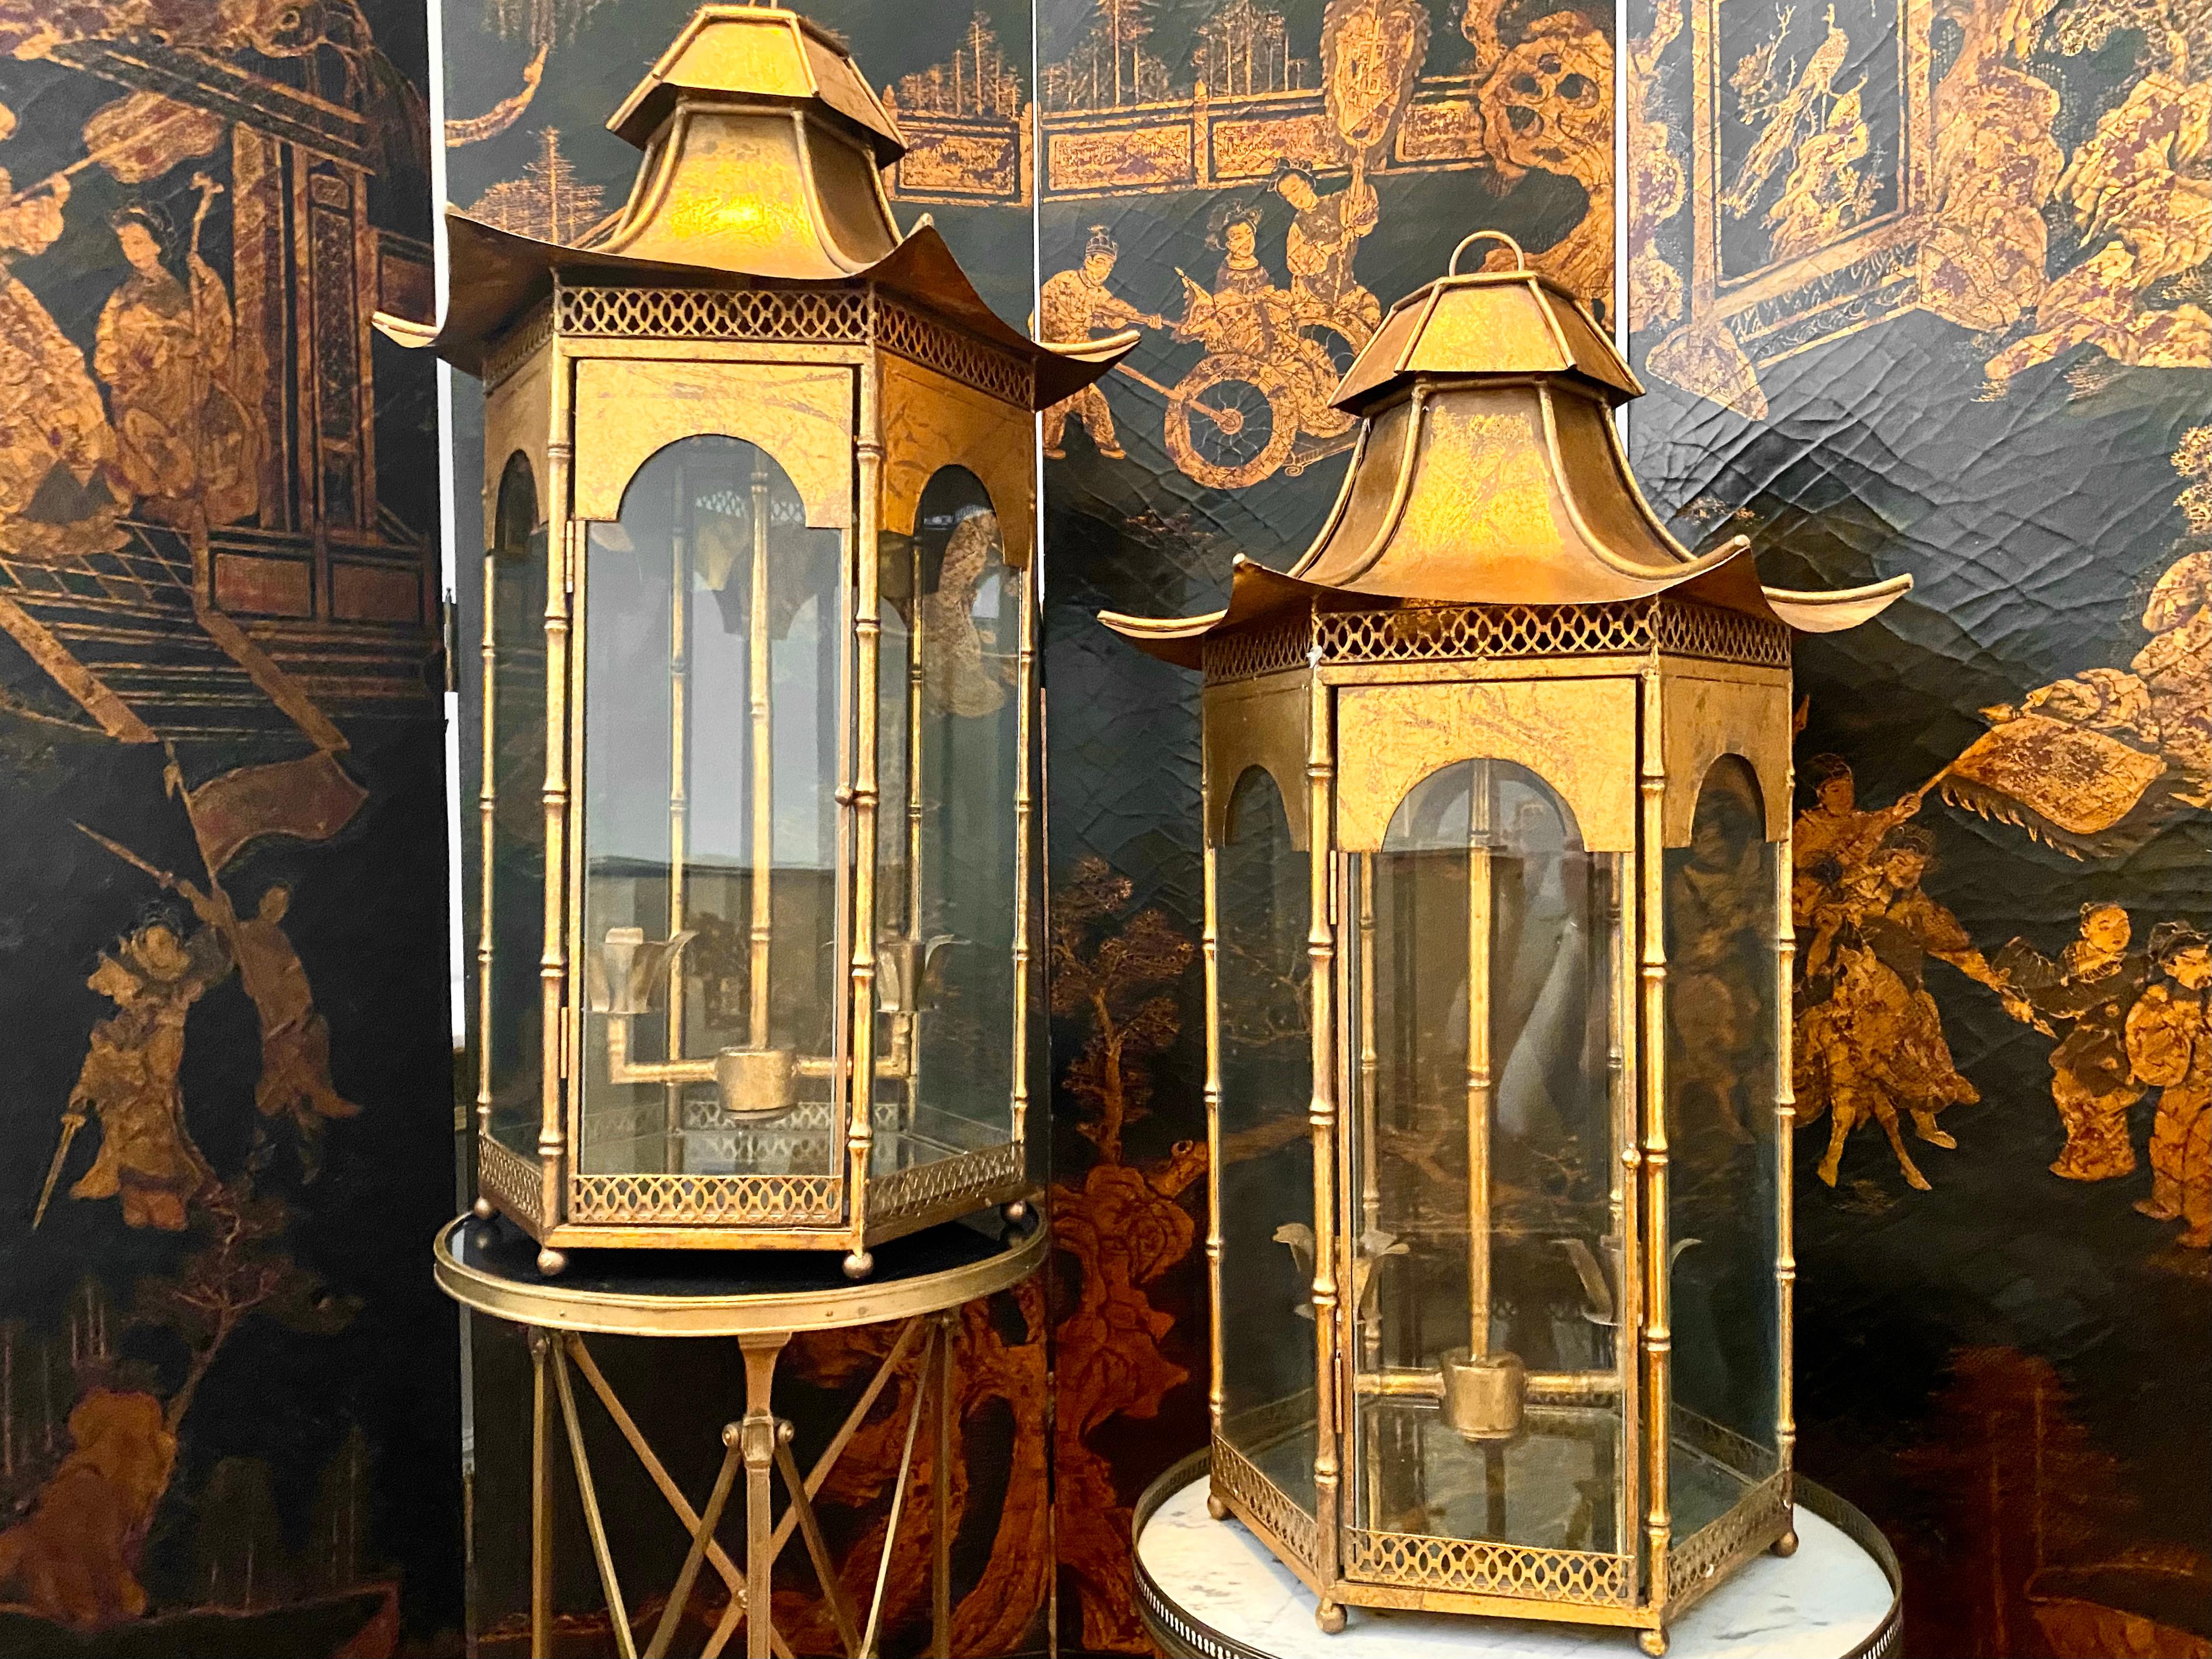 Large pair of Pagoda Chinoiserie gilt bronze lanterns, Mid-Century Modern.
Exceptionally decorative and beautiful, each lantern has a pair of candle holders accessible through a hinged glass door. The pagoda shape is accentuated from the curve of